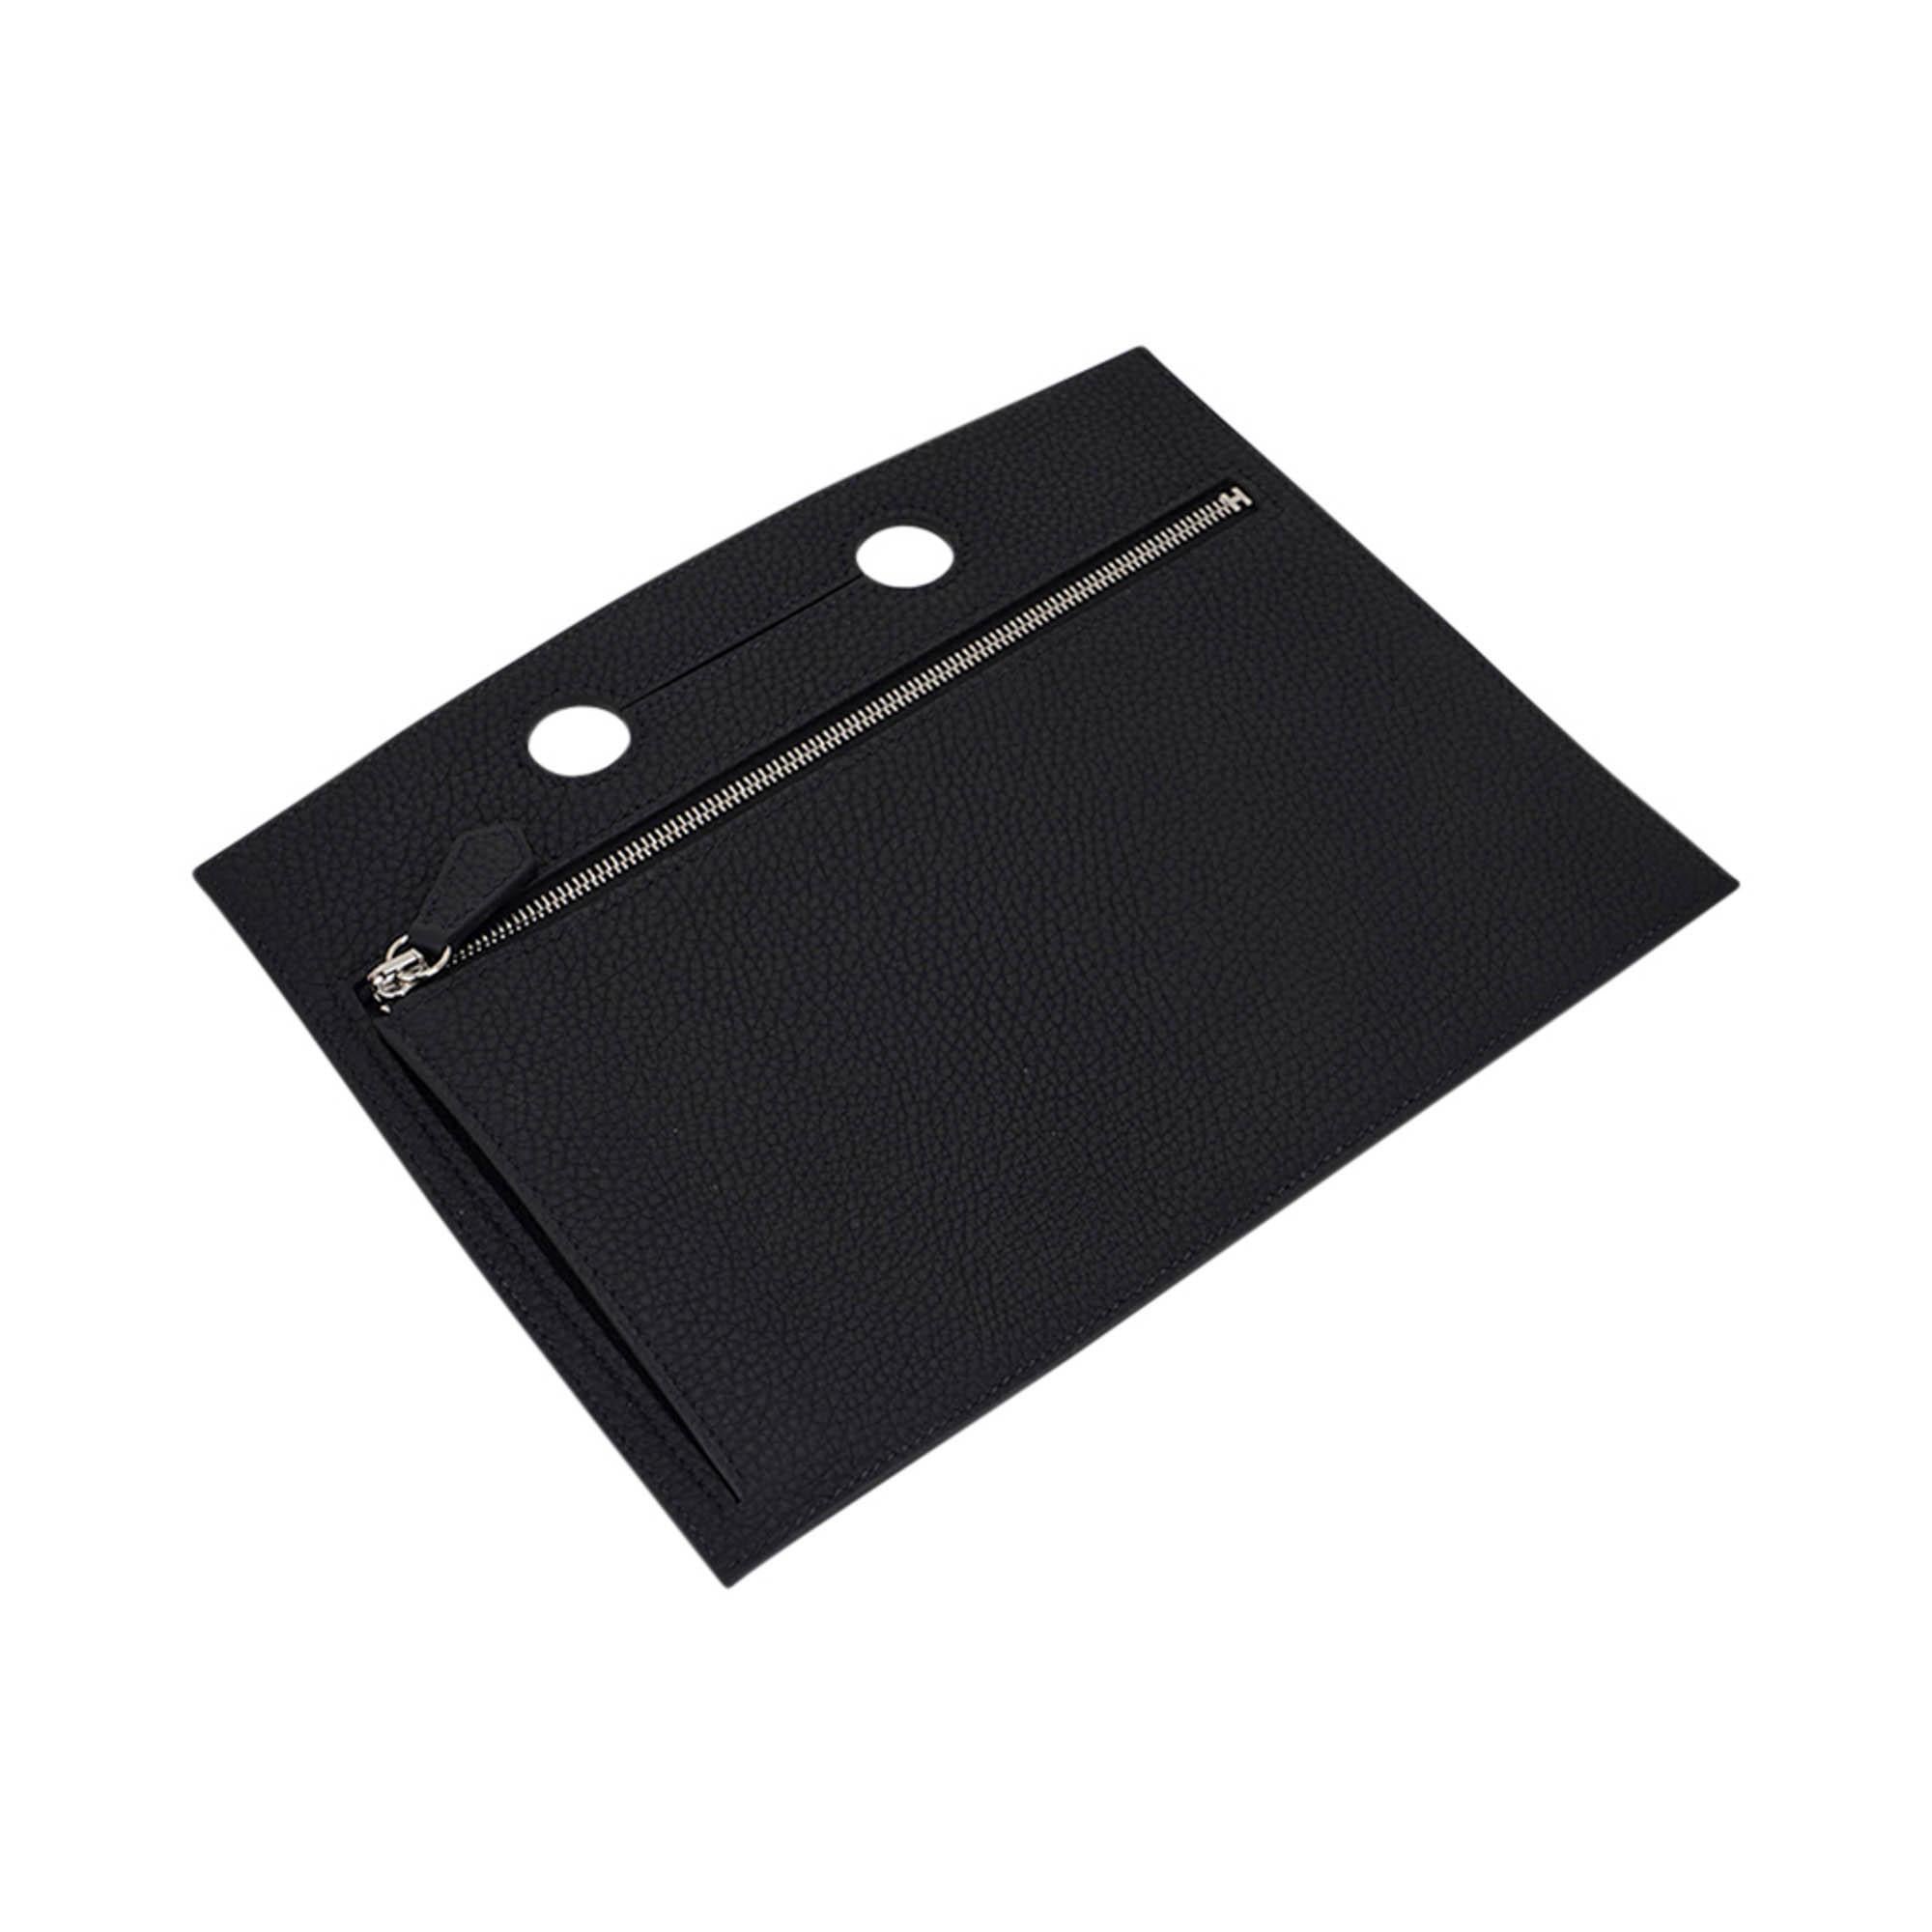 Mightychic offers an Hermes Backpocket 25 Pouch featured in Black.
Beautiful in Togo leather with palladium zipper.
This flat Backpocket fits easily over the handle and features a partitioned interior.
In a fabulous neutral color!  And fun to mix